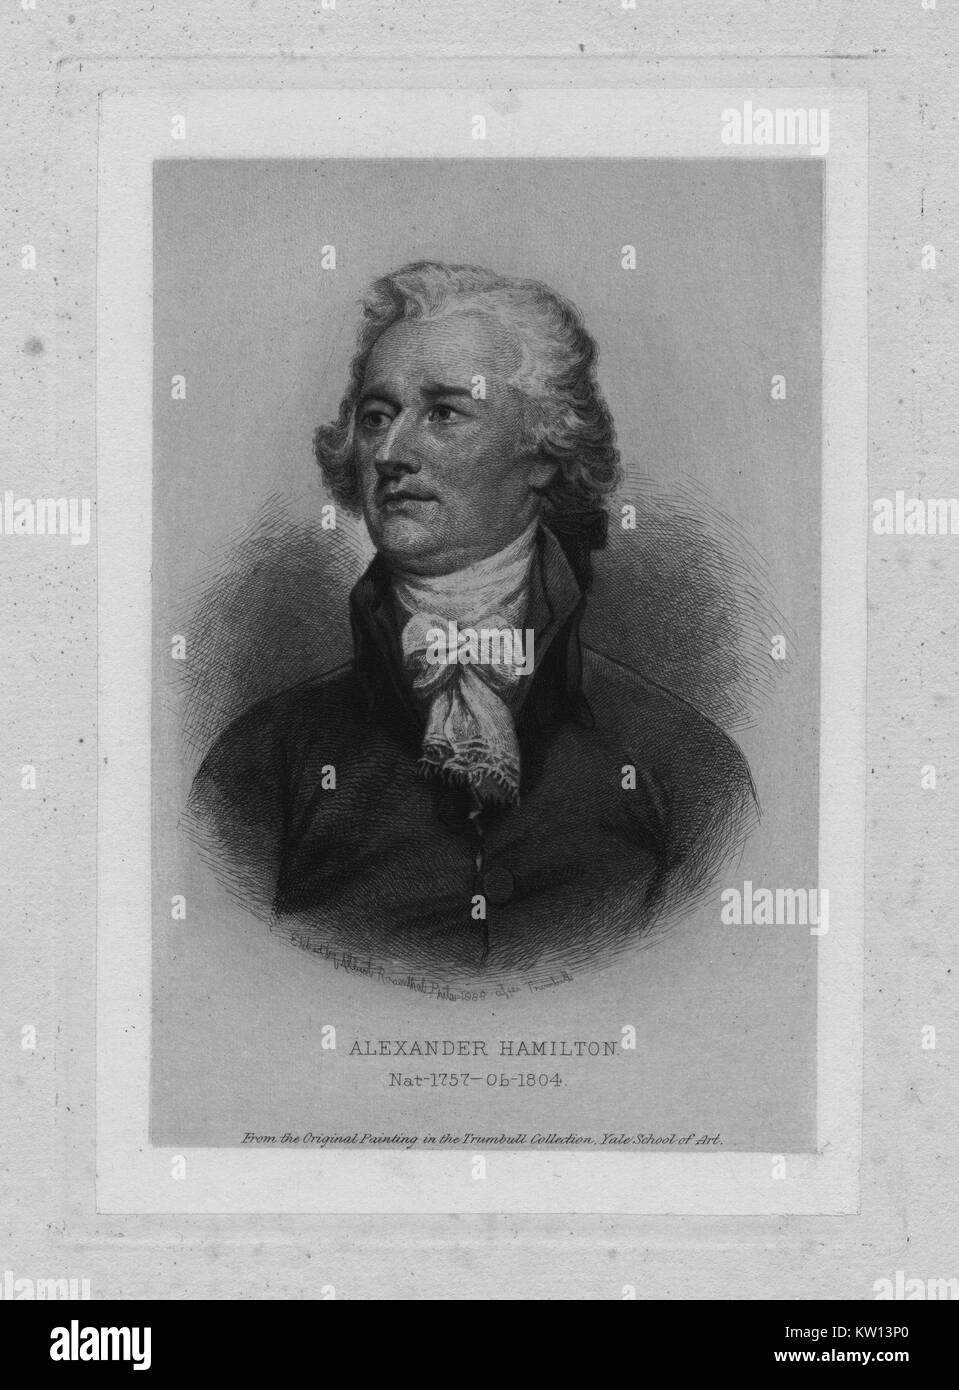 An etching from a portrait of Alexander Hamilton, he was one of the Founding Fathers of the United States of America, served as chief staff aide to George Washington during the American Revolutionary War and was the first United States Secretary of the Treasury, the years of Hamilton's birth and death are featured below his portrait, 1836. From the New York Public Library. Stock Photo